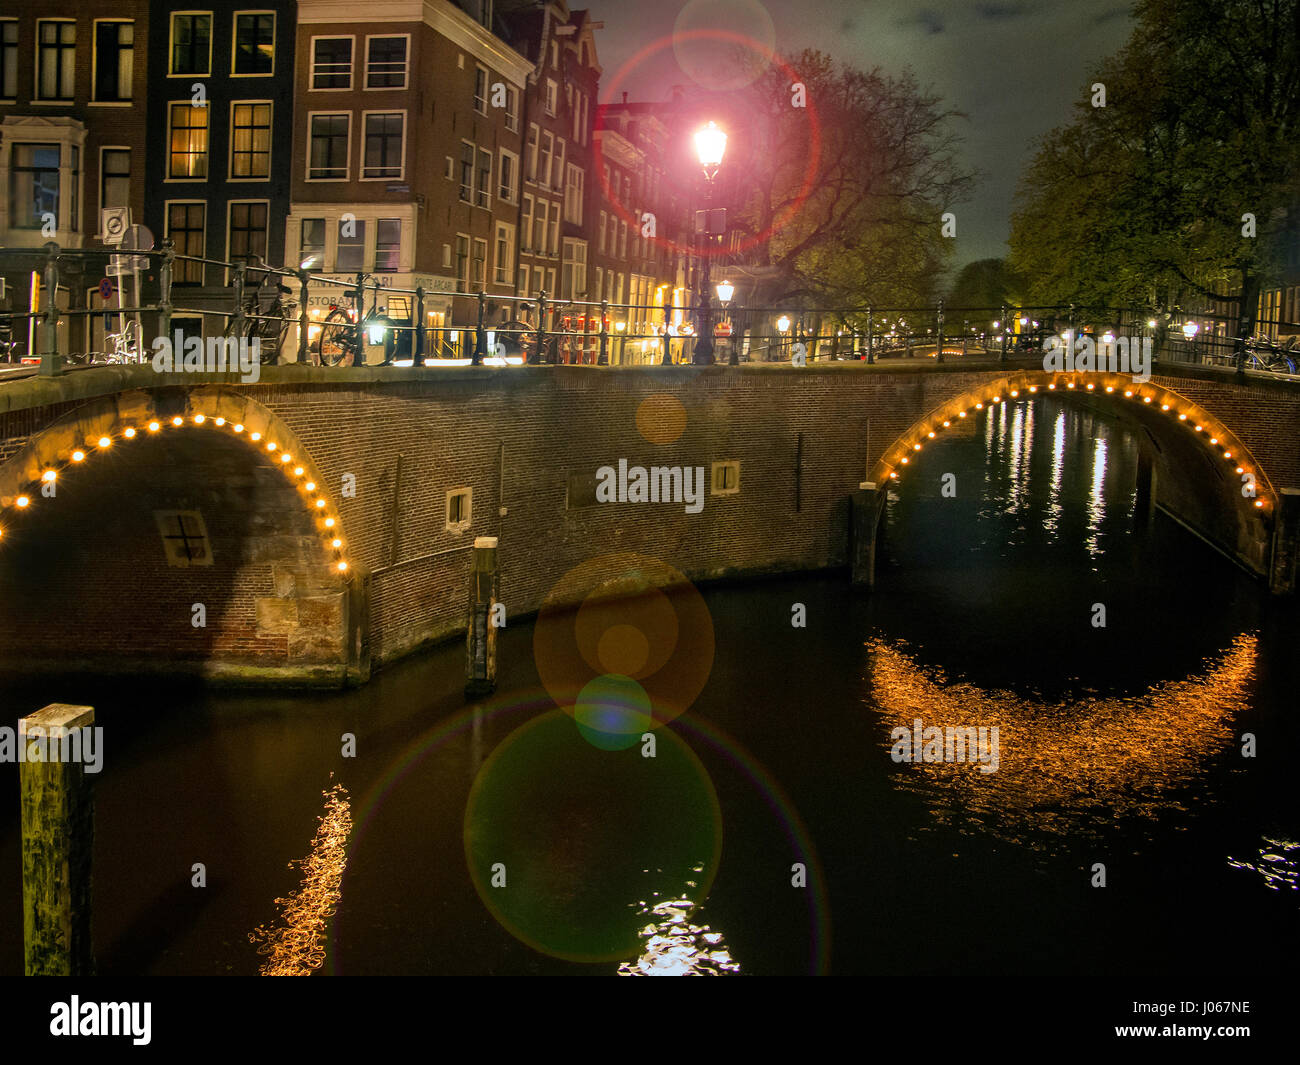 Canal bridges on Amsterdamse canal Stock Photo